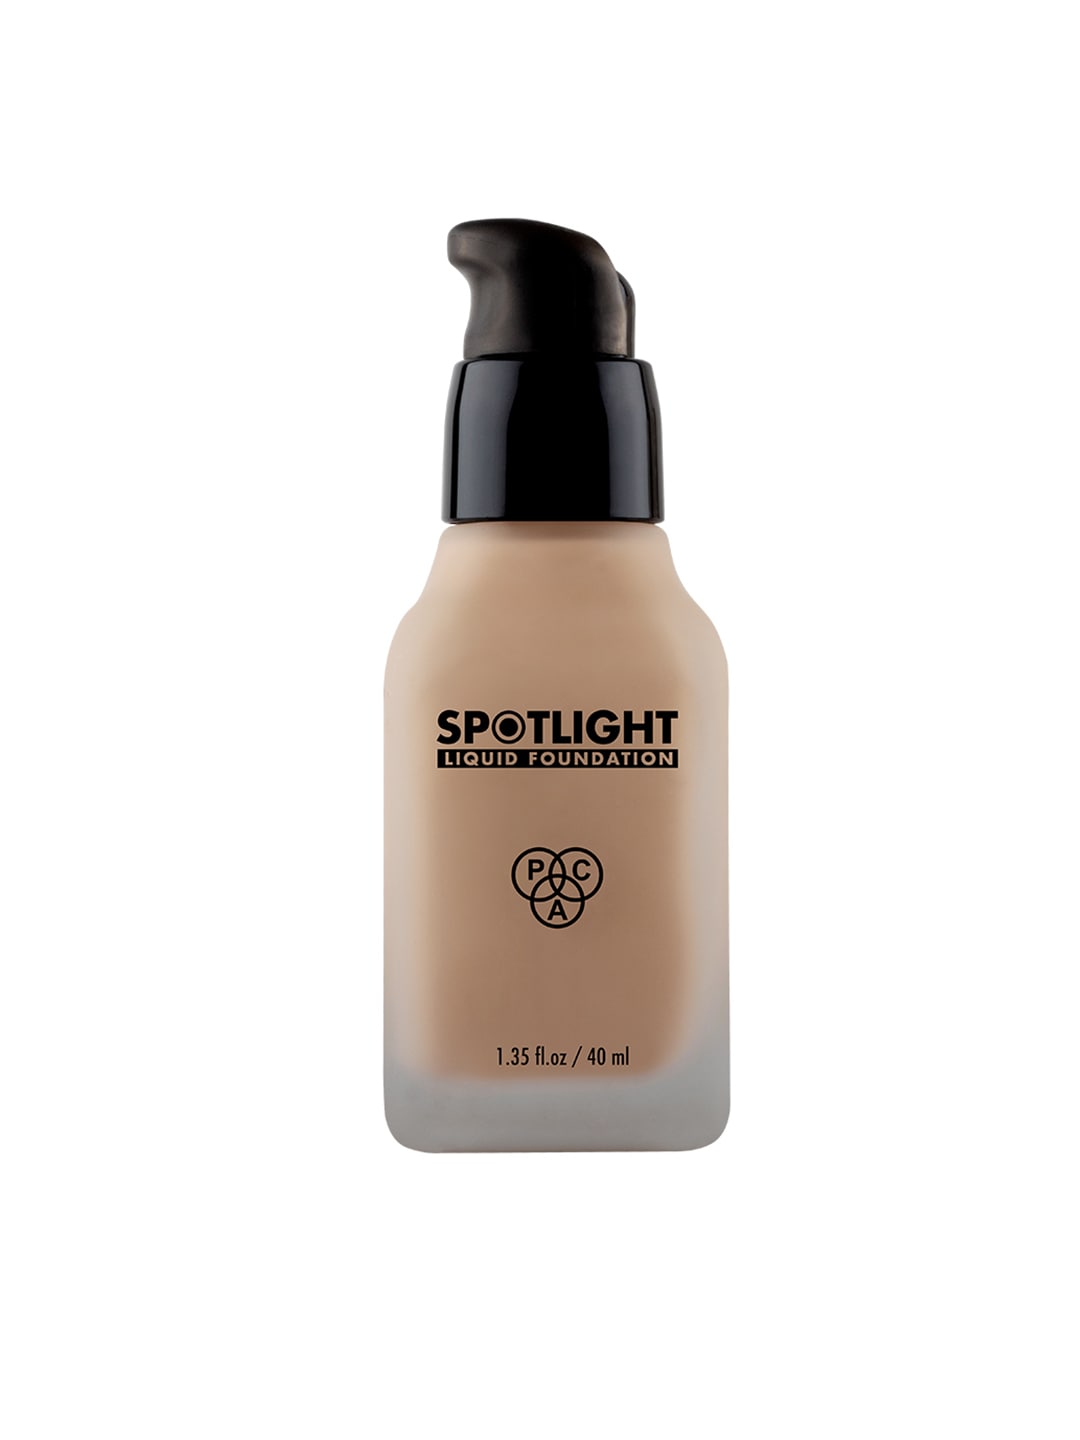 PAC Spotlight Waterproof Liquid Foundation with Hyaluronic Acid 40ml - Moon Mist 08 Price in India